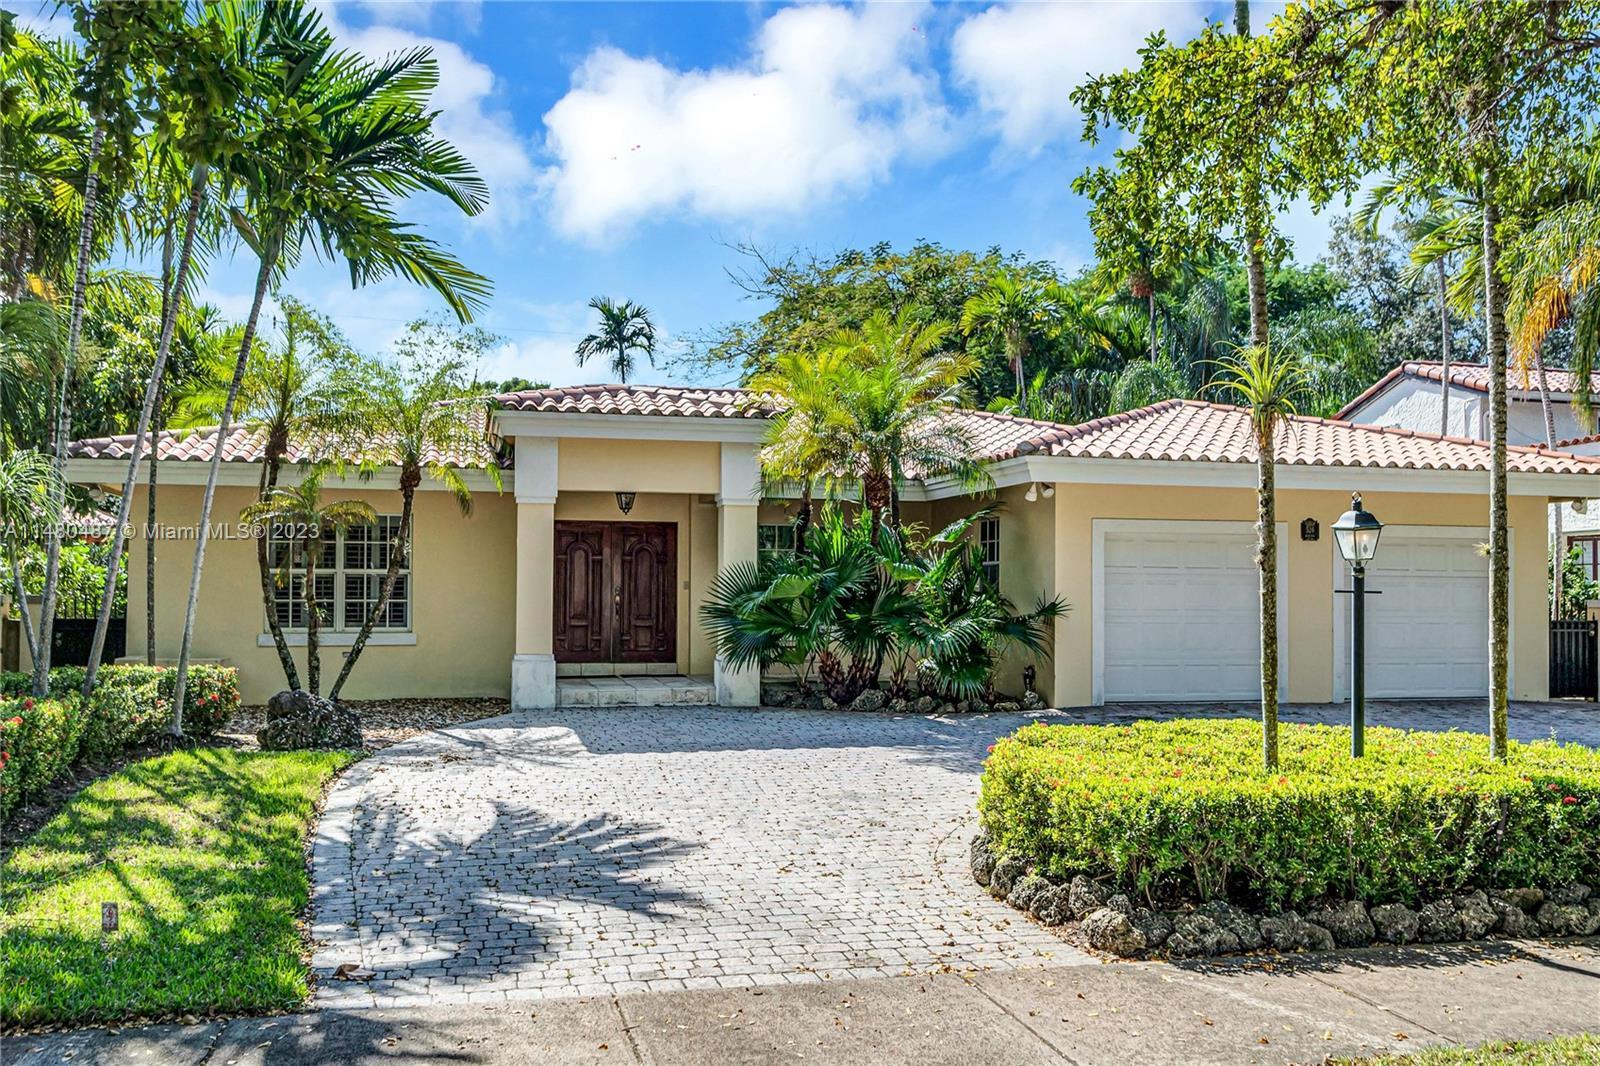 Designed for both beauty and functionality this 1998 Coral Gables home nestled on a premier street h